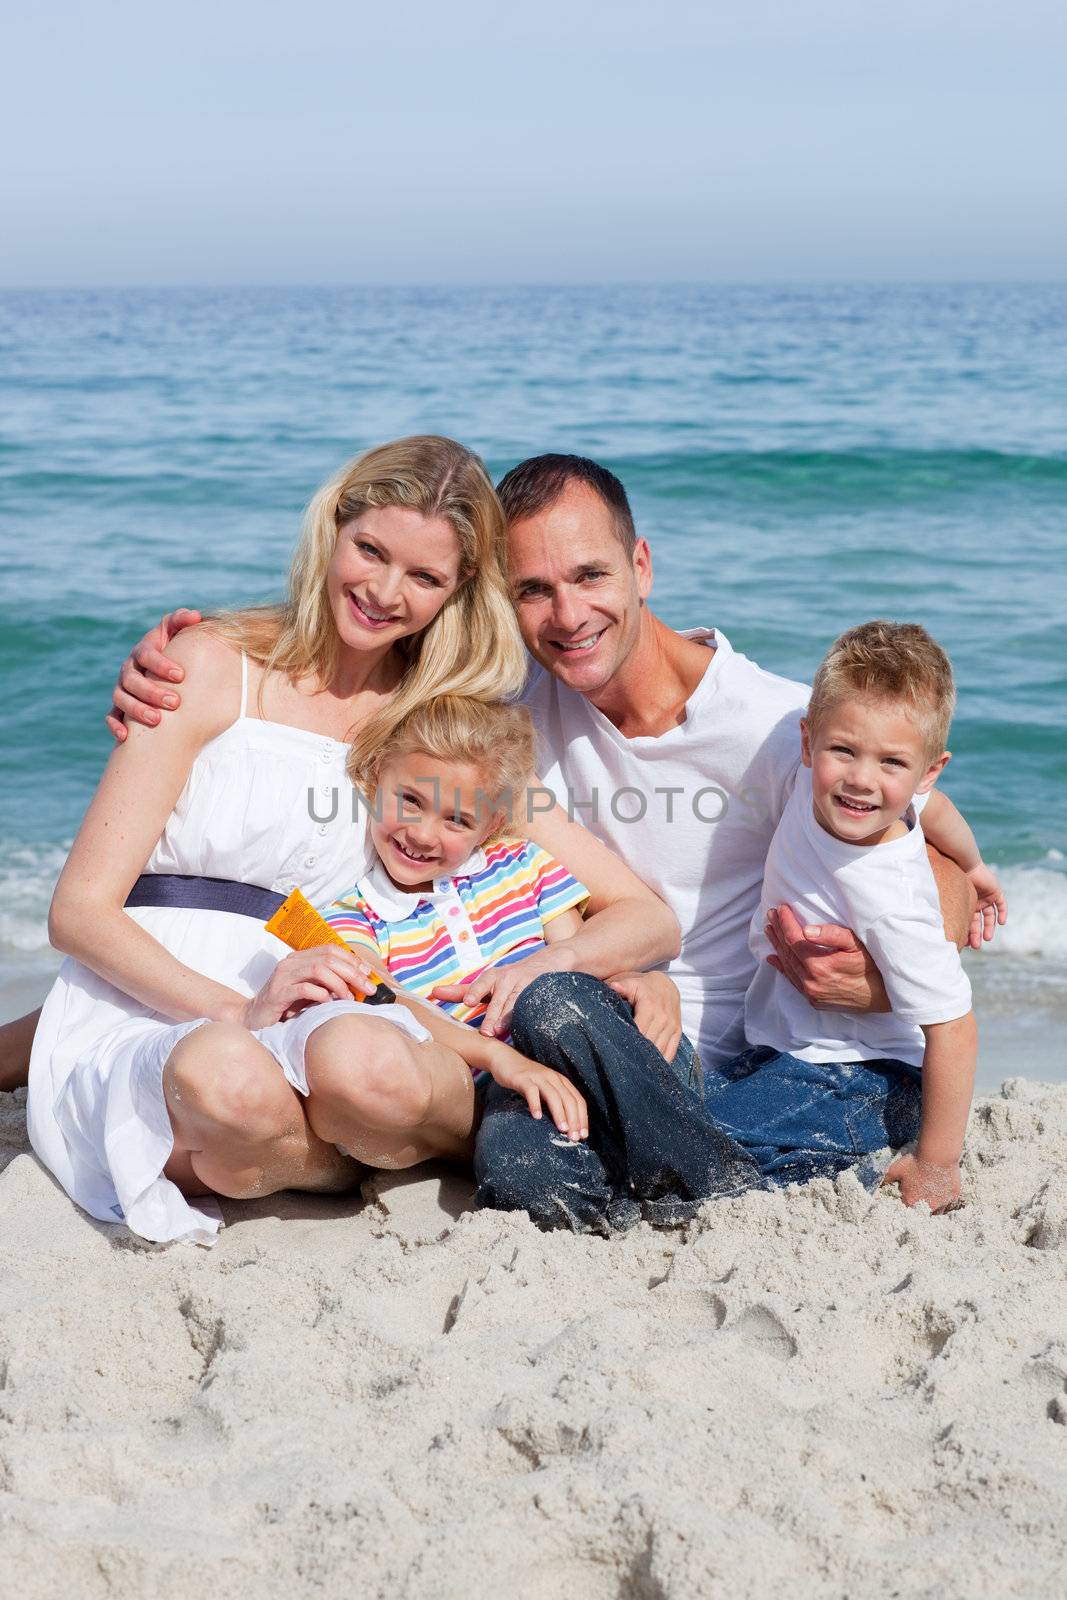 Portrait f a cheerful family holding suncreen at the beach